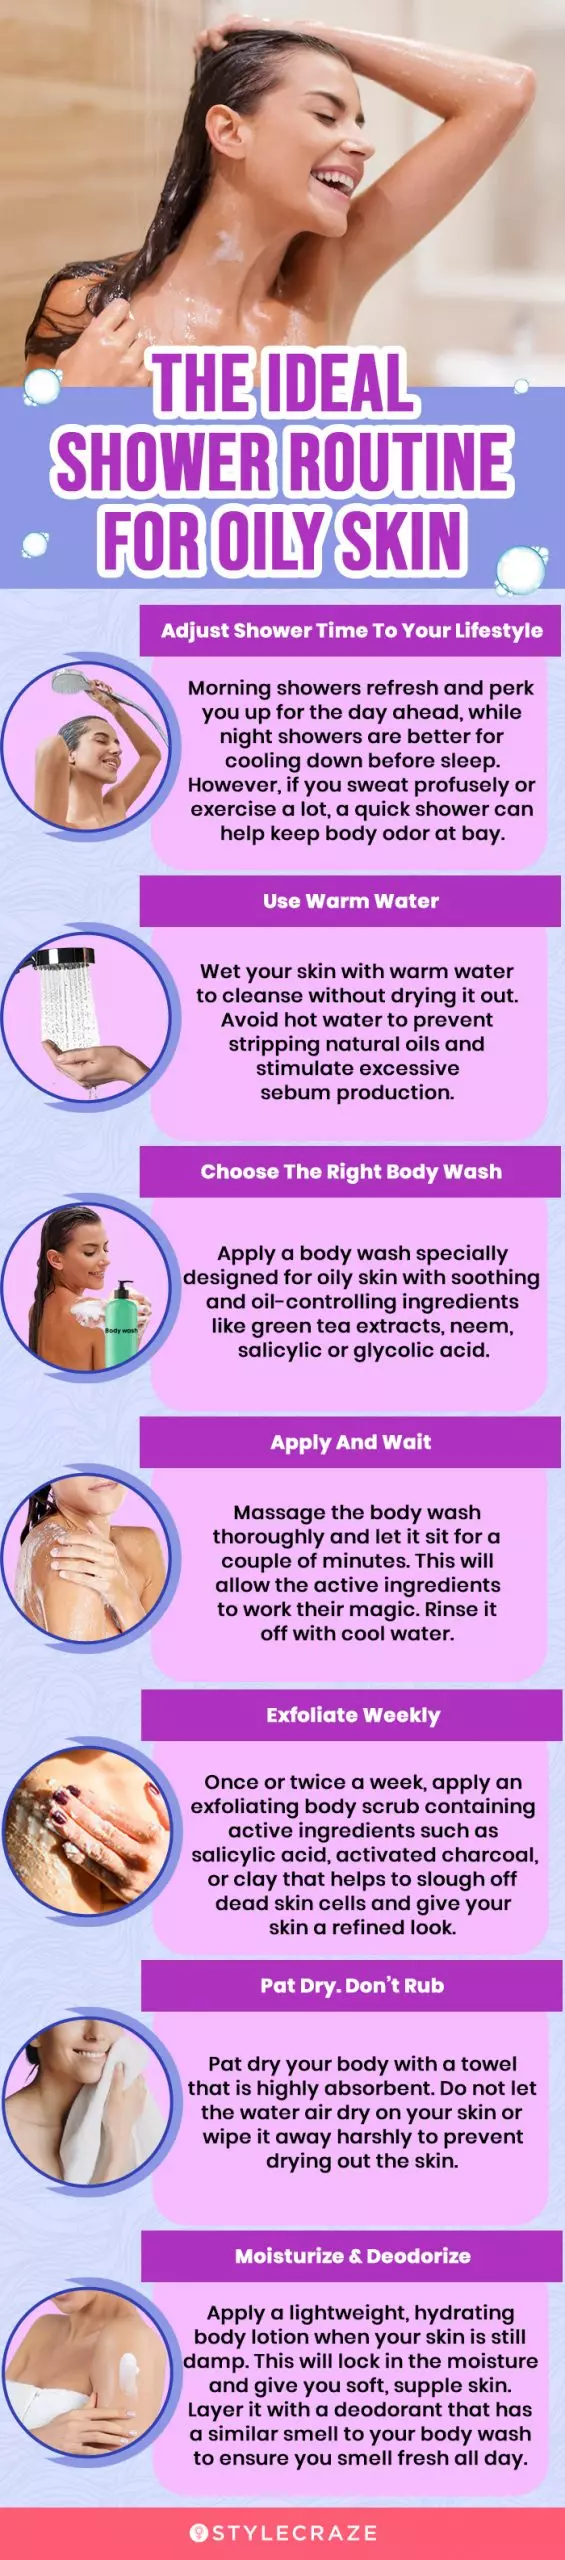 The Ideal Shower Routine For Oily Skin (infographic)